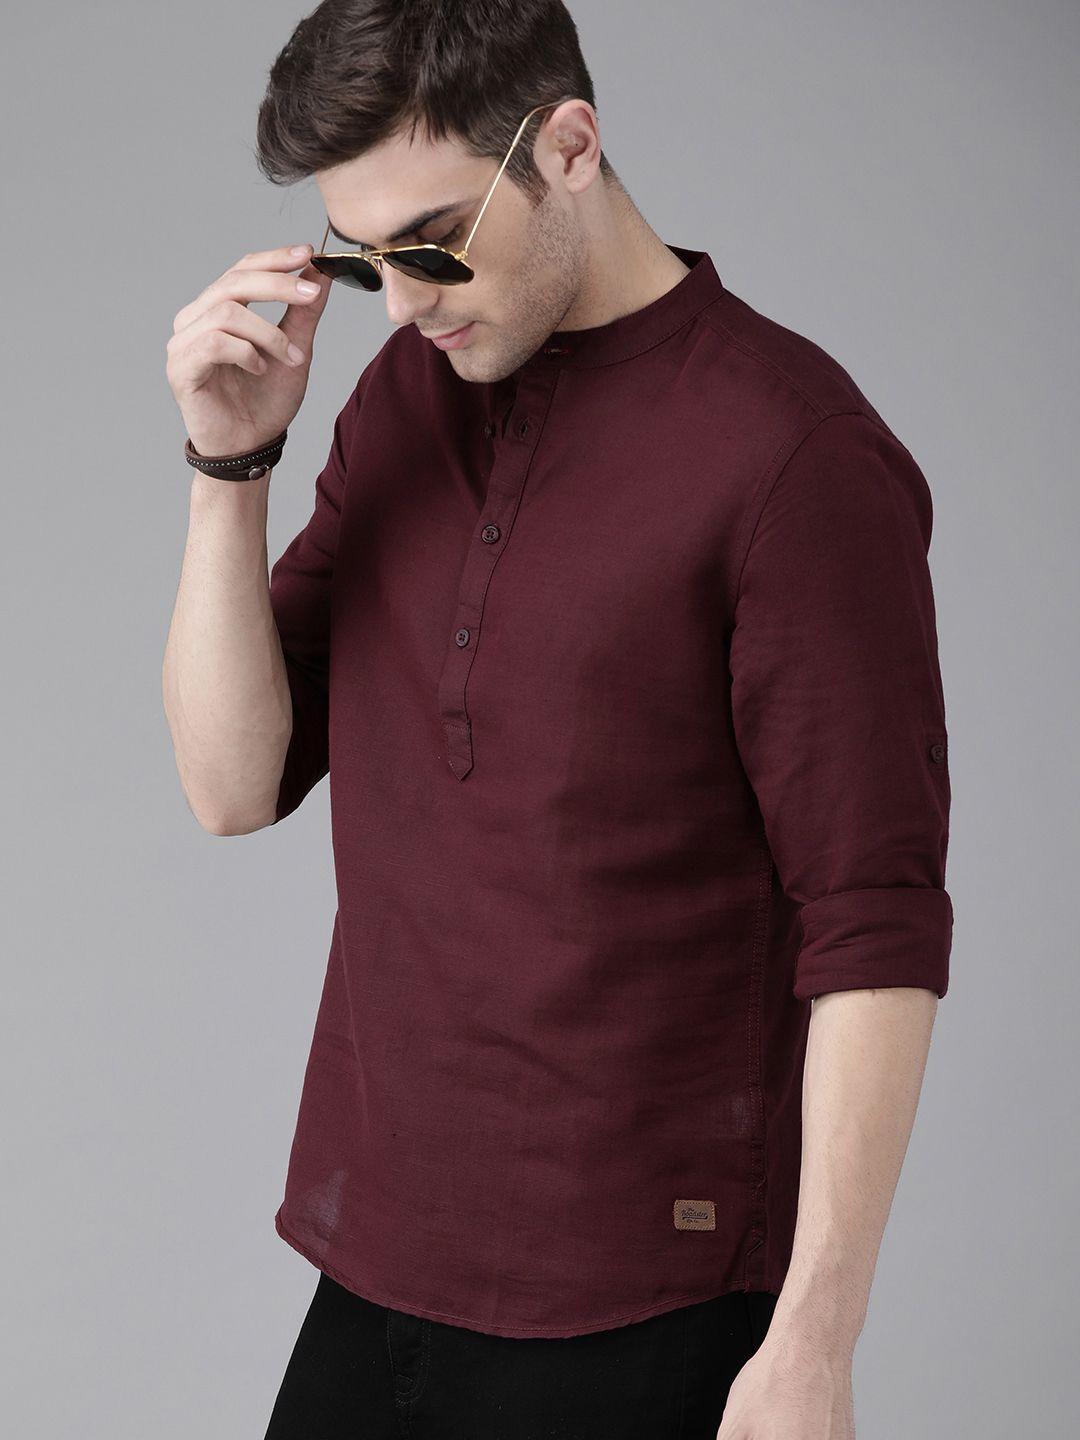 the-roadster-lifestyle-co-men-maroon-sustainable-casual-shirt